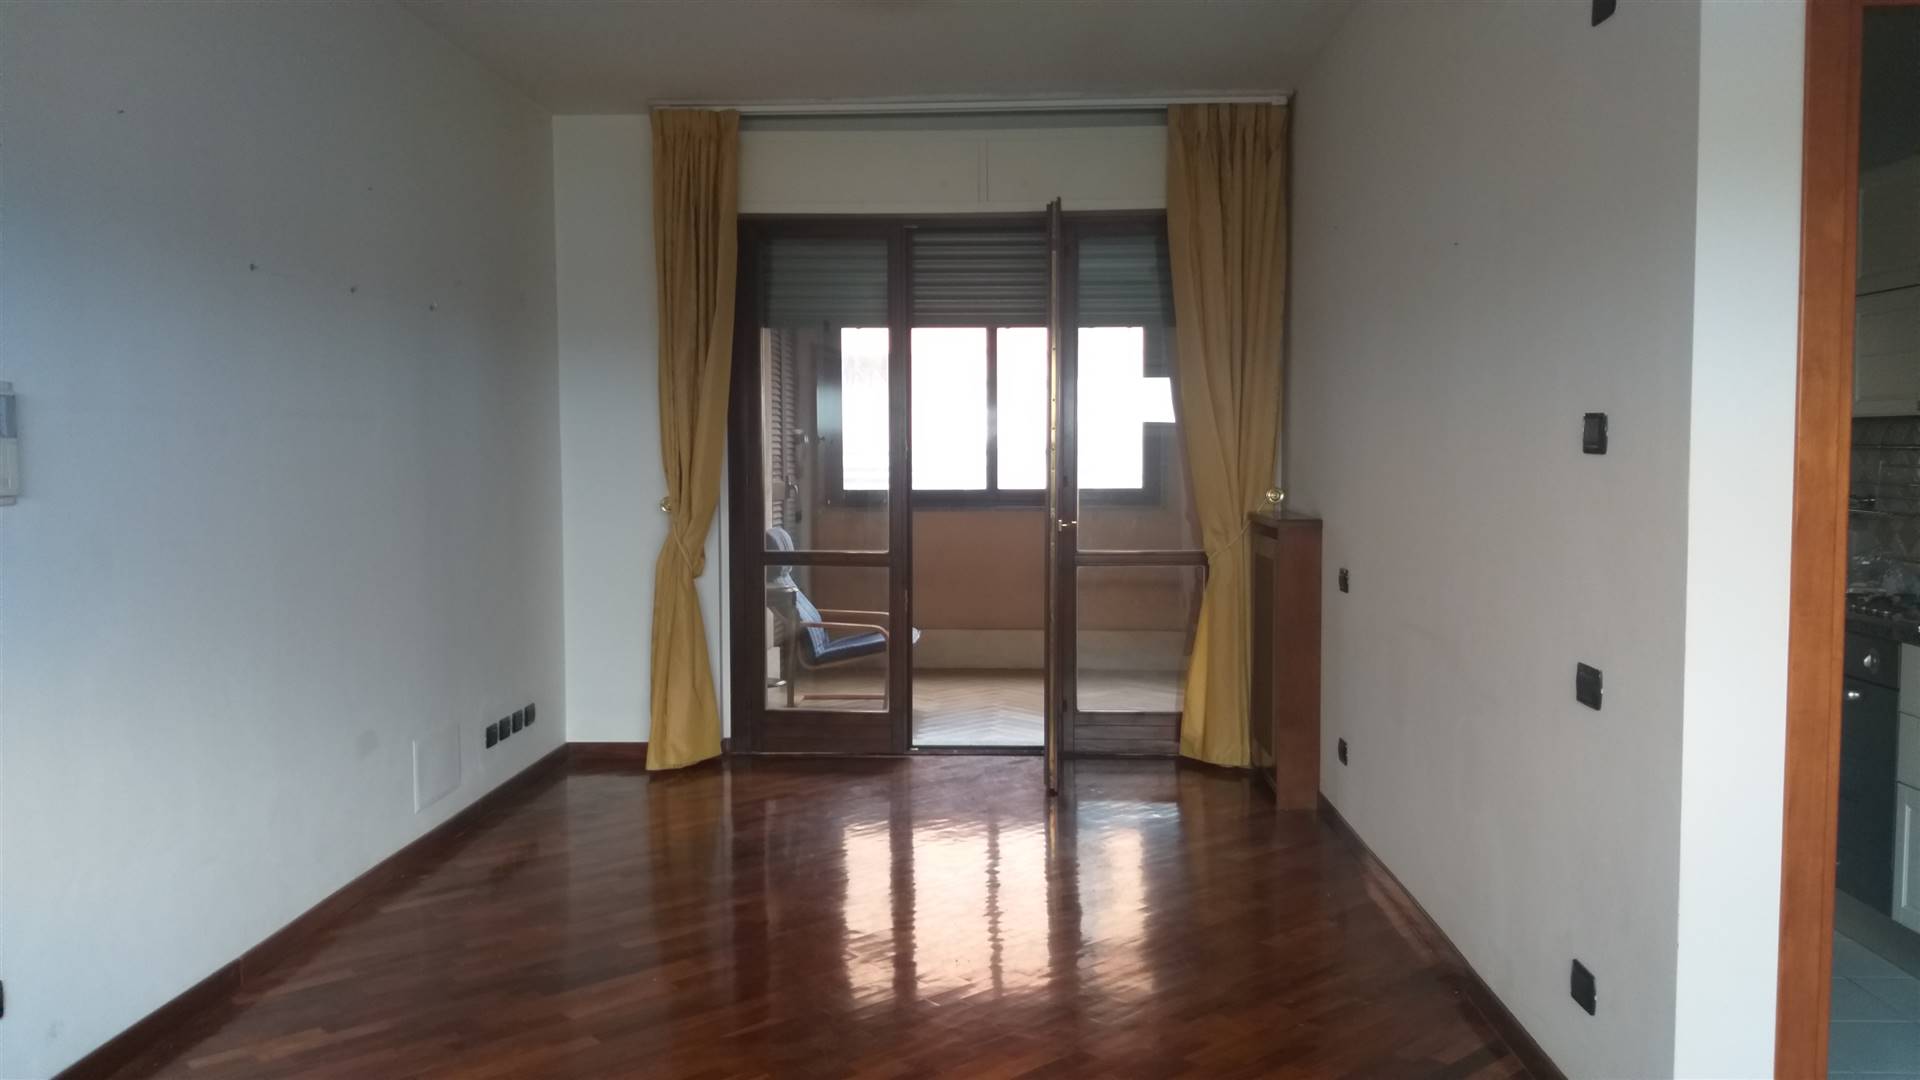 CENTRO 14, FIUMICINO, Apartment for sale of 63 Sq. mt., Excellent Condition, Heating Individual heating system, Energetic class: G, Epi: 175 kwh/m2 